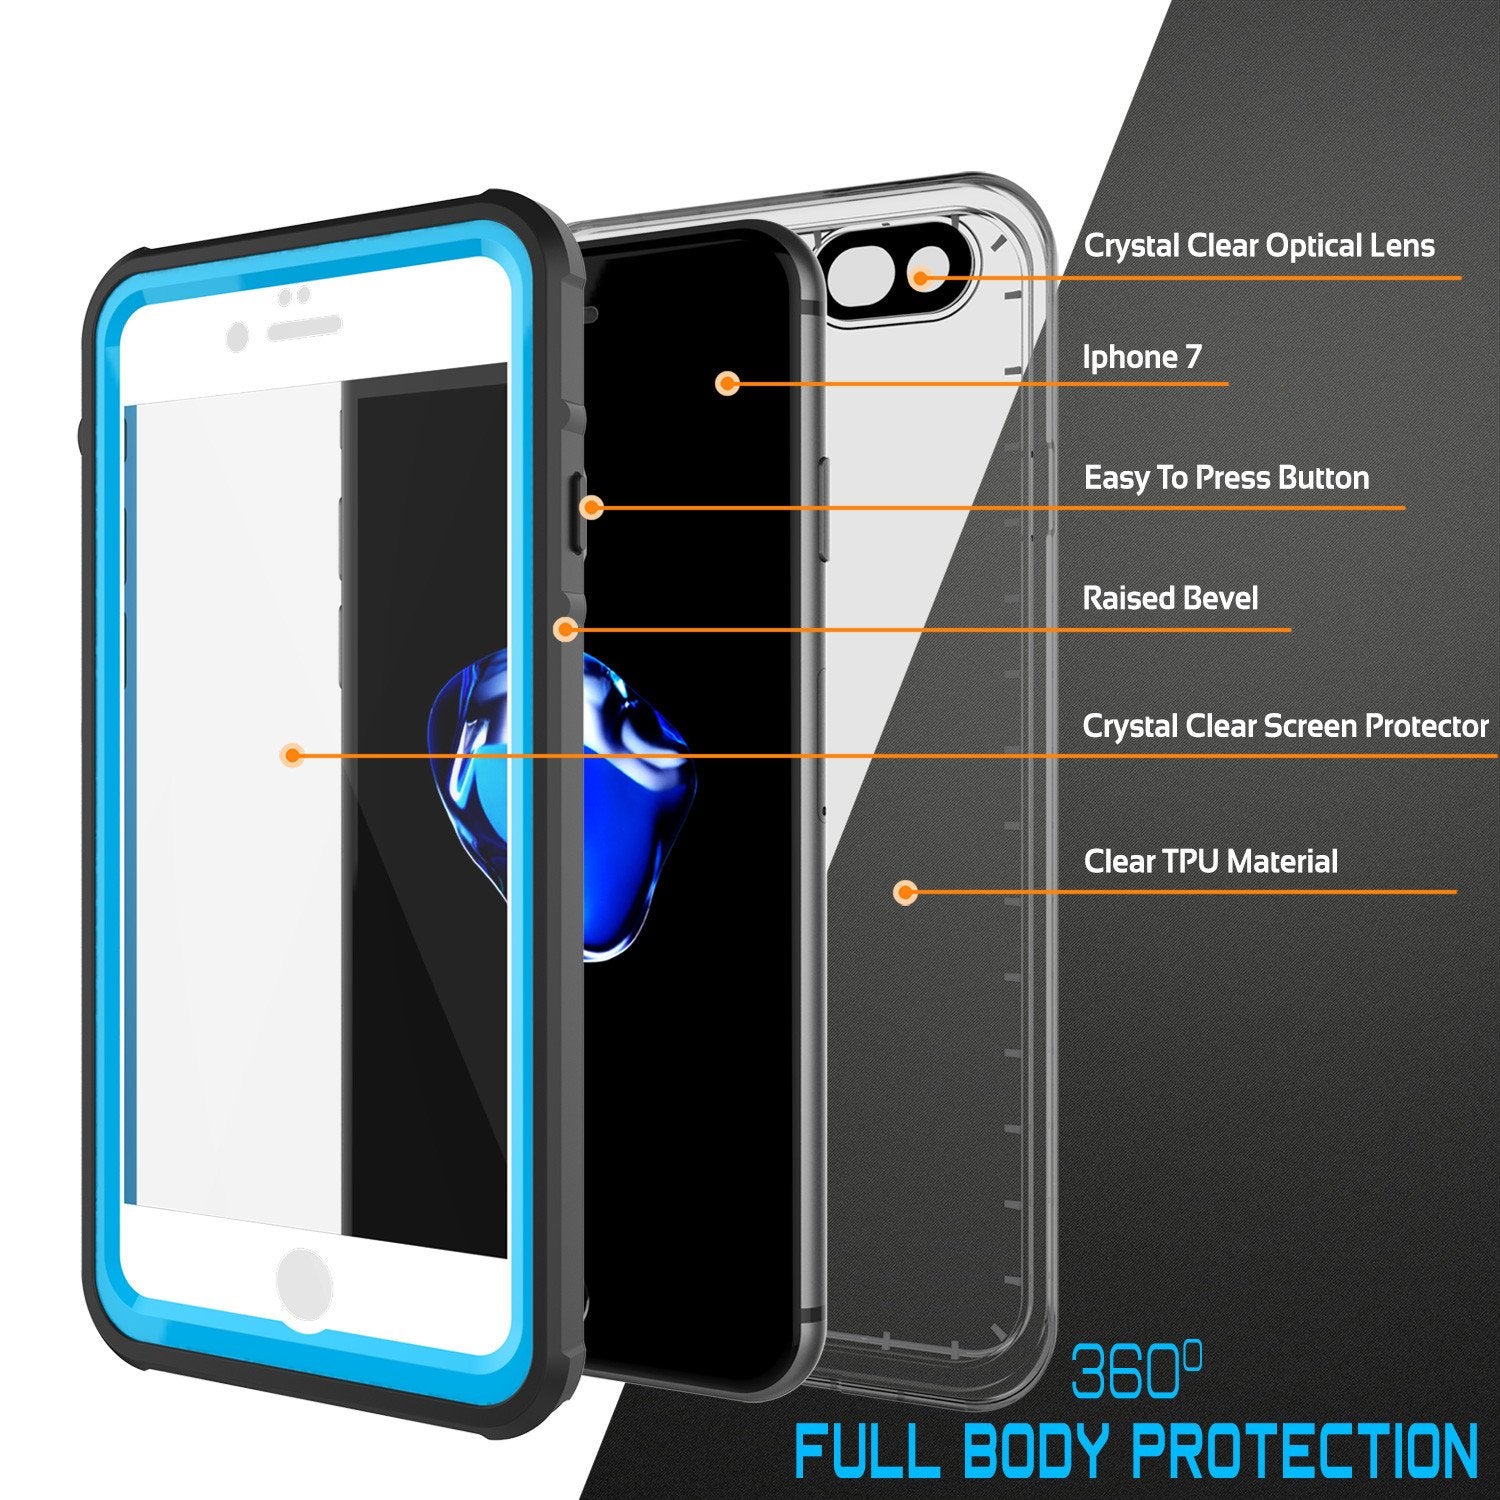 Apple iPhone 7 Waterproof Case, PUNKcase CRYSTAL Light Blue  W/ Attached Screen Protector  | Warranty - PunkCase NZ